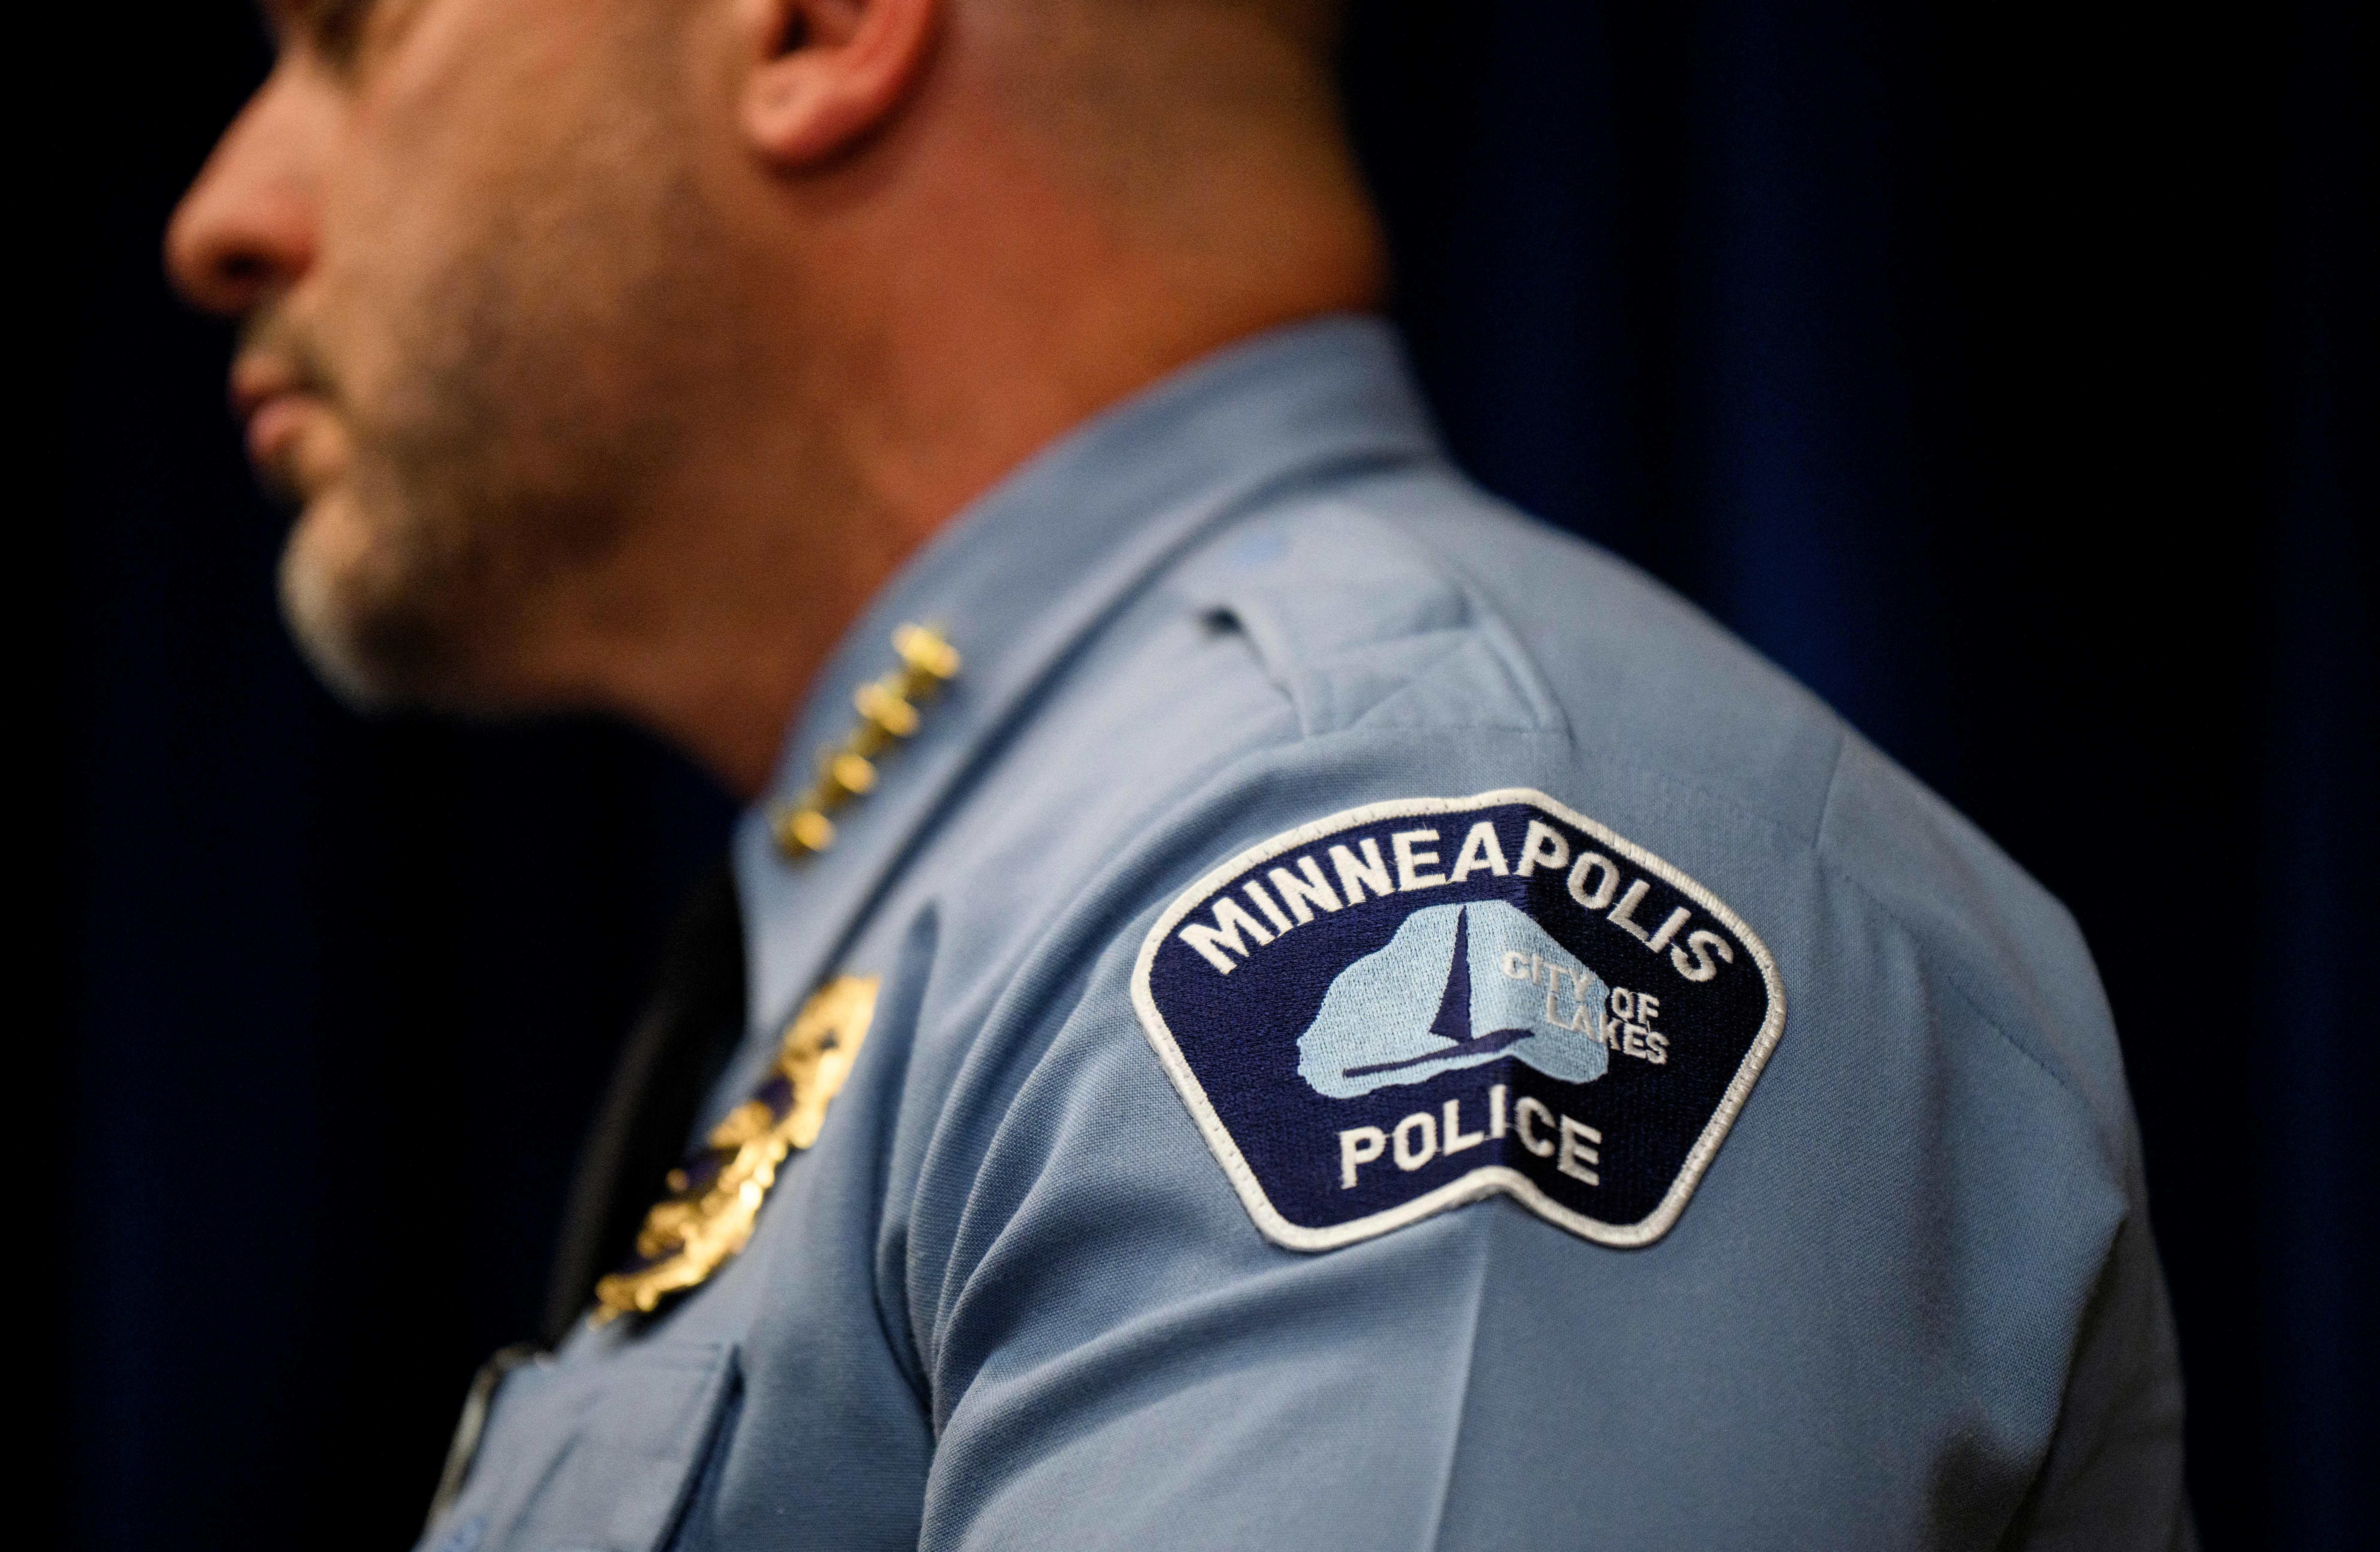 Minneapolis police suffer from historically low staffing shortages: 'Not sustainable'